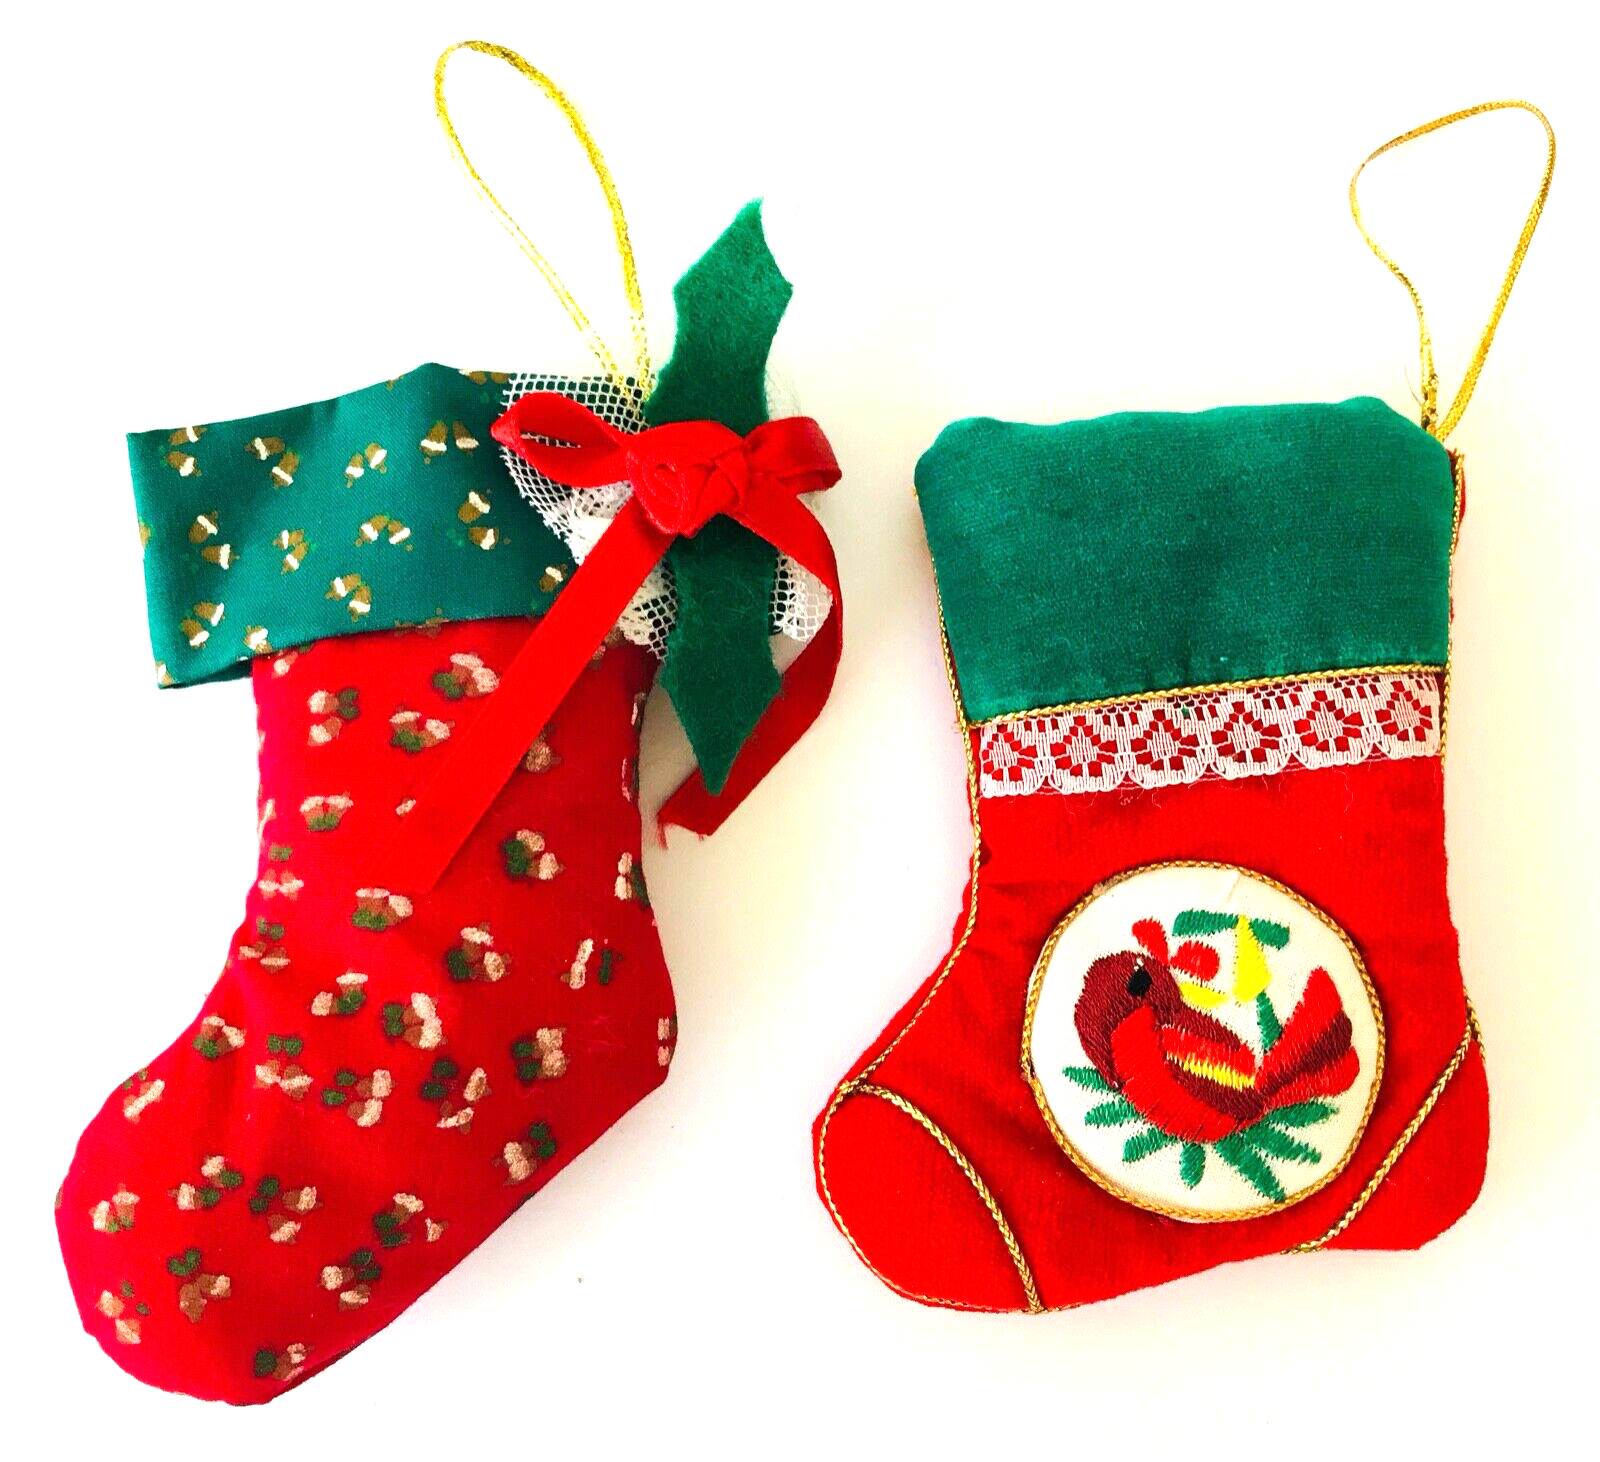 Primary image for 2 Little Christmas Stocking Ornaments Red & Green Fabric & Trims 4.5" tall